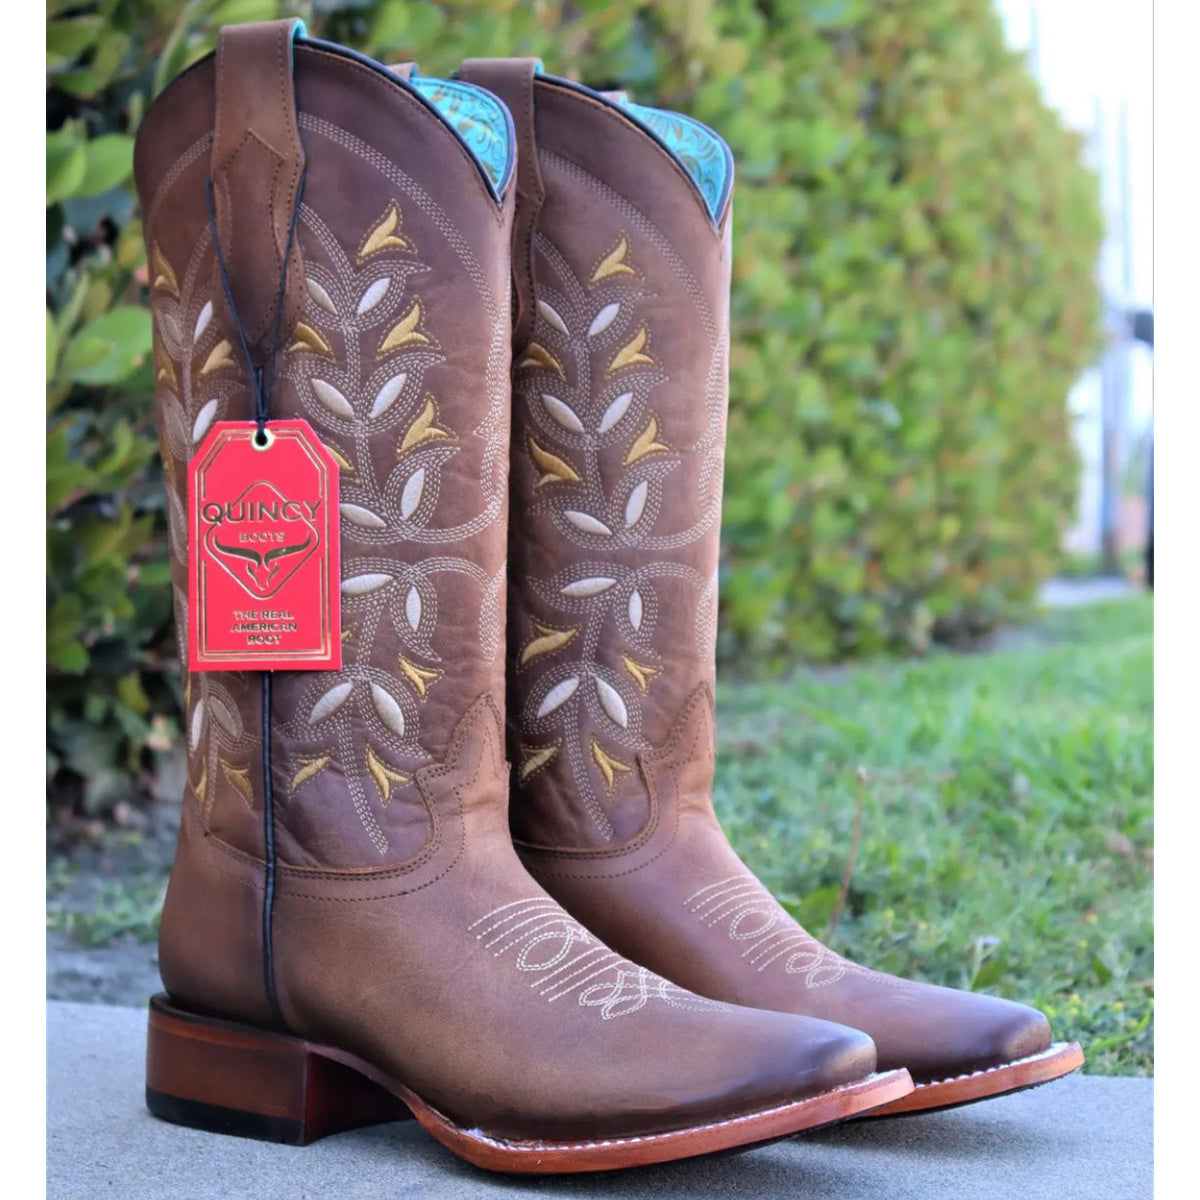 Quincy Women's Honey Cowgirl Leather Boots – VAQUERO BOOTS